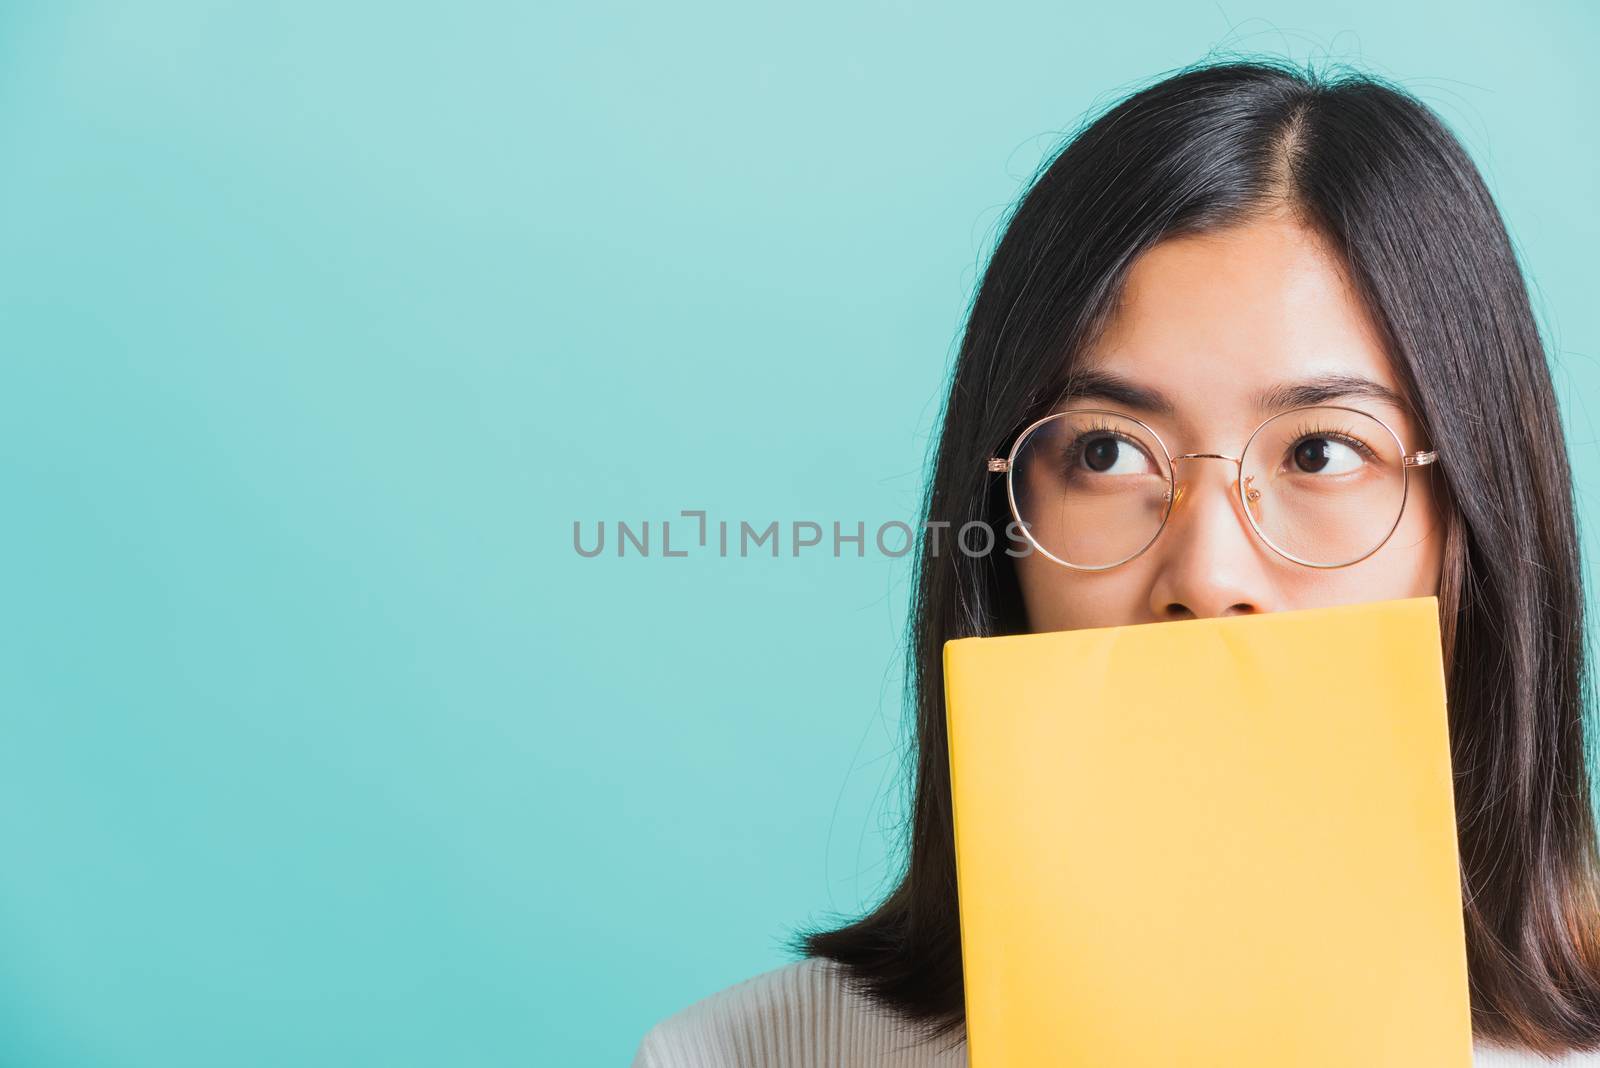 Young beautiful Asian woman hiding behind an open book, Portrait female in glasses is holding and reading a book, studio shot isolated on a blue background, Education concept